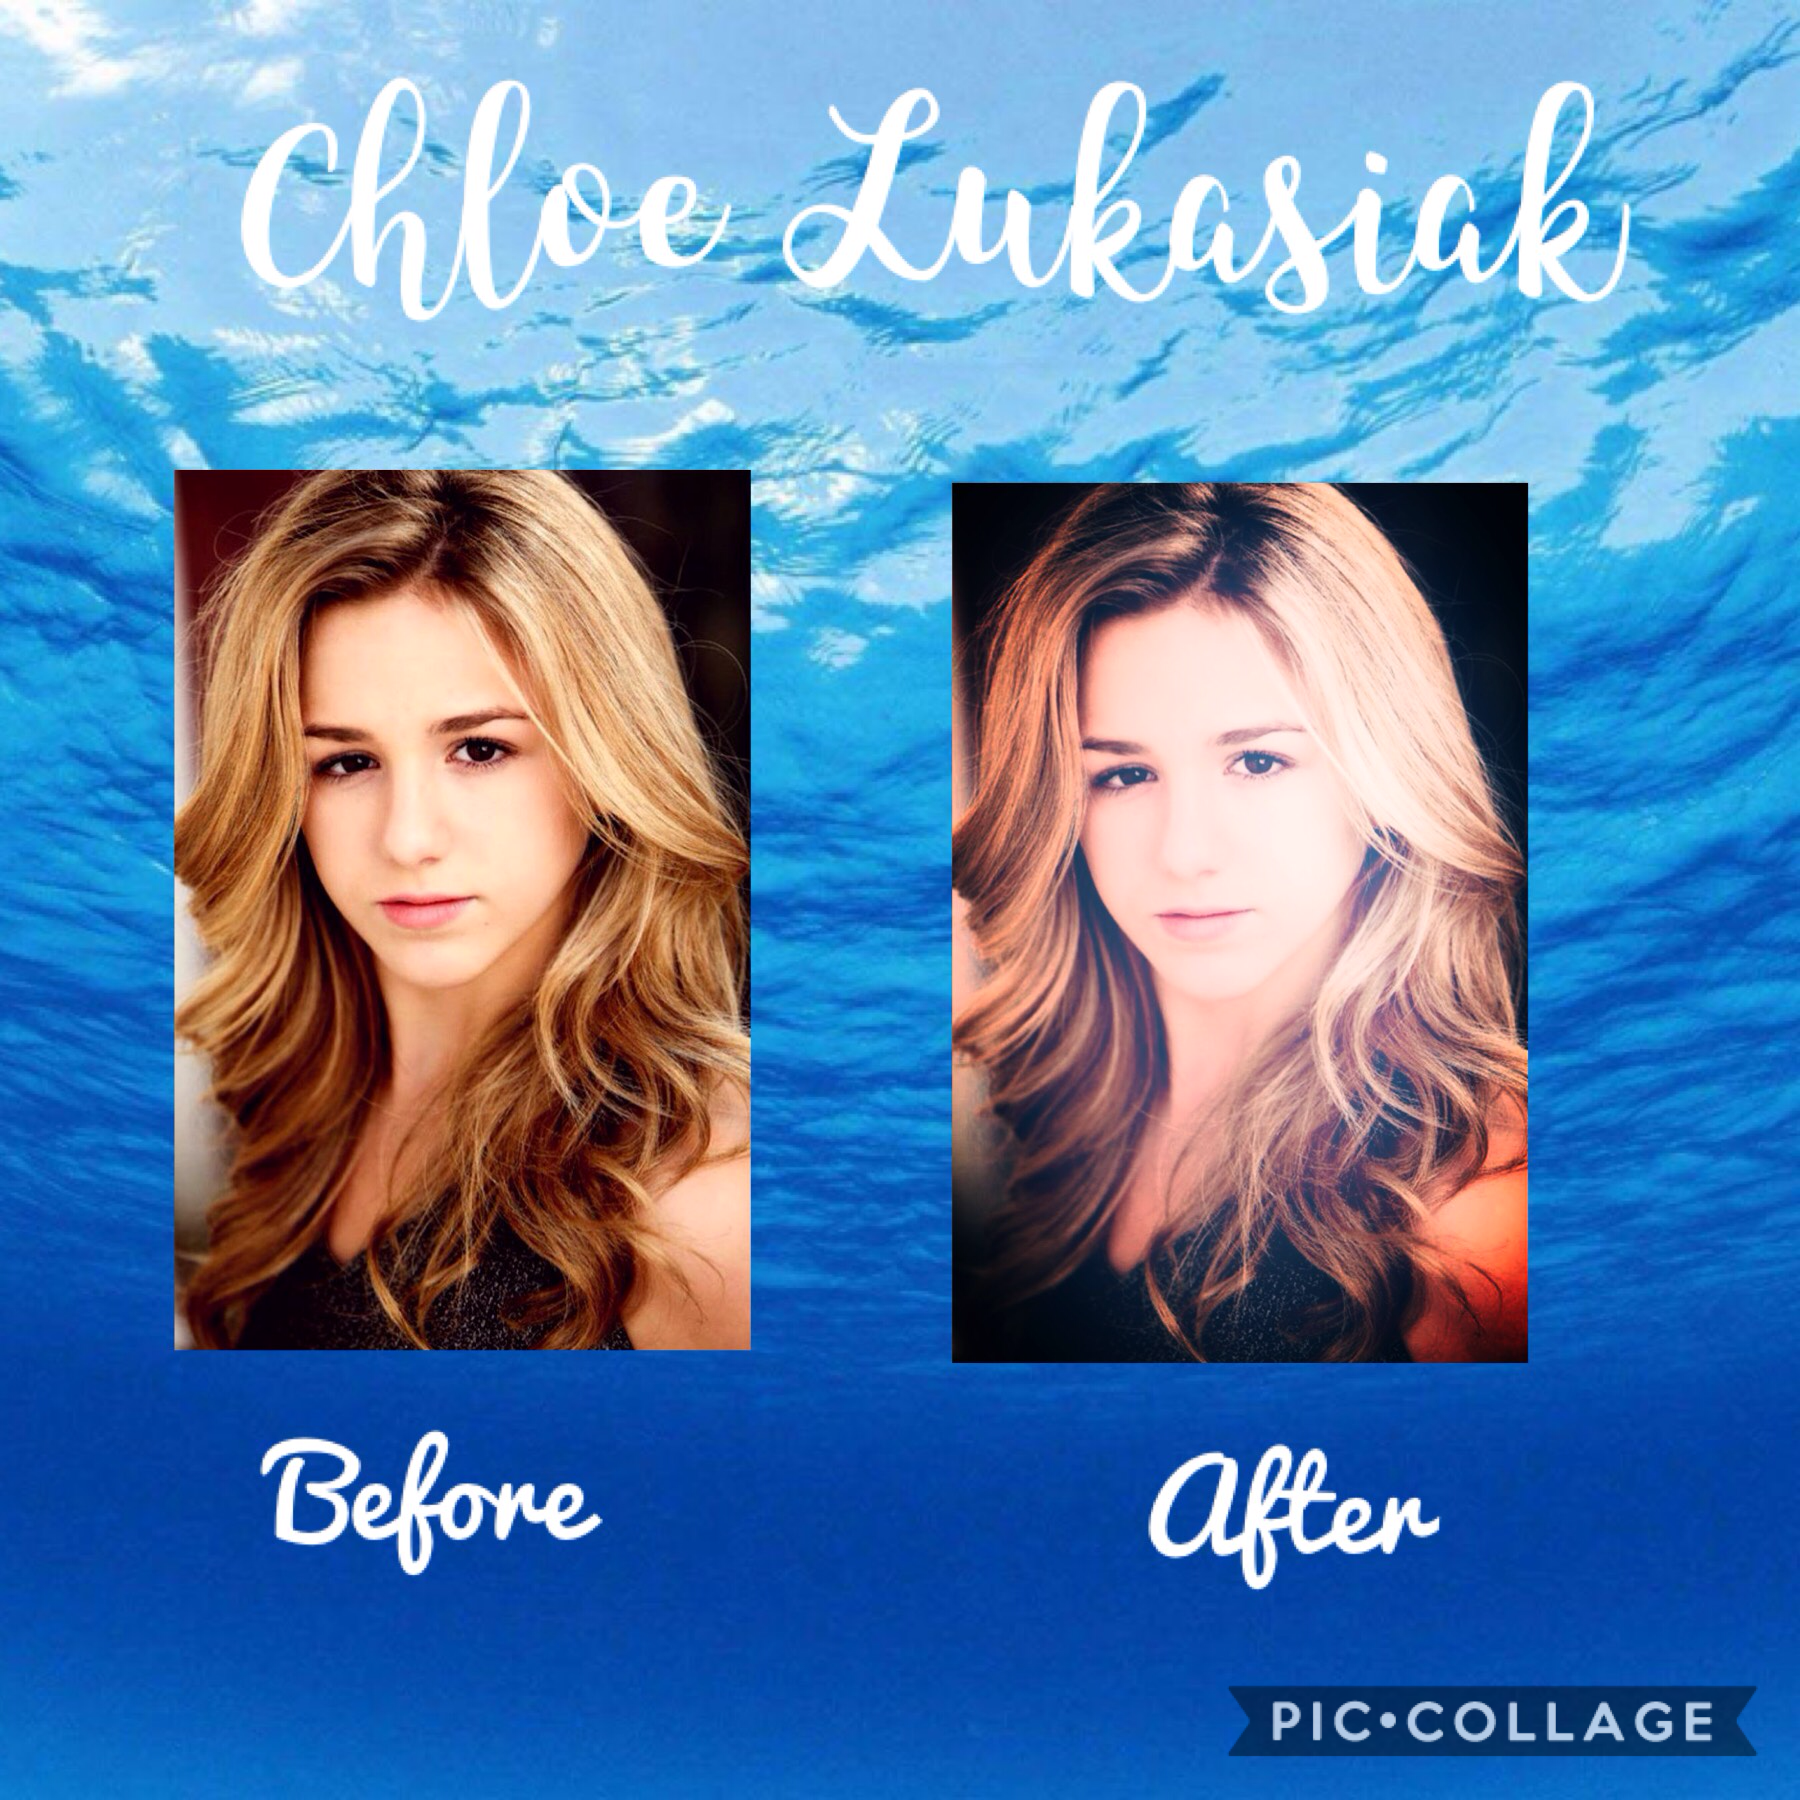 Chloe Lukasiak before and after!
Comment which one you like best!